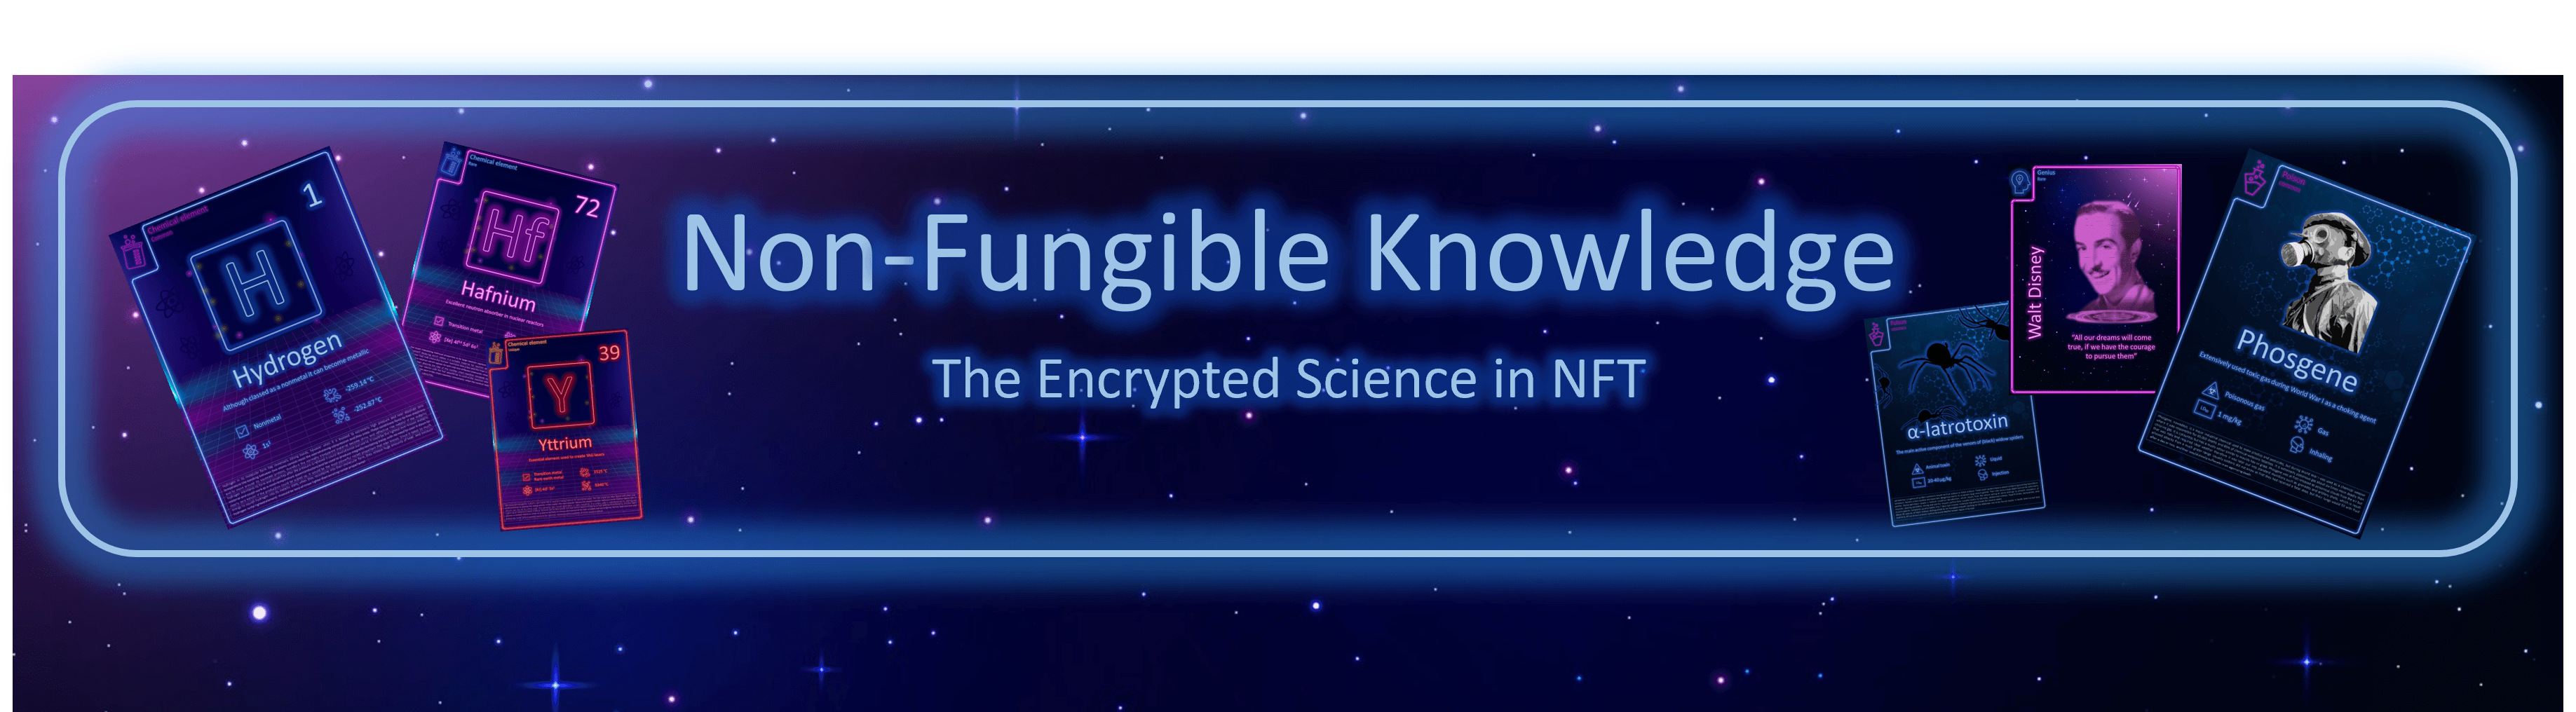 NonFungibleKnowledge banner